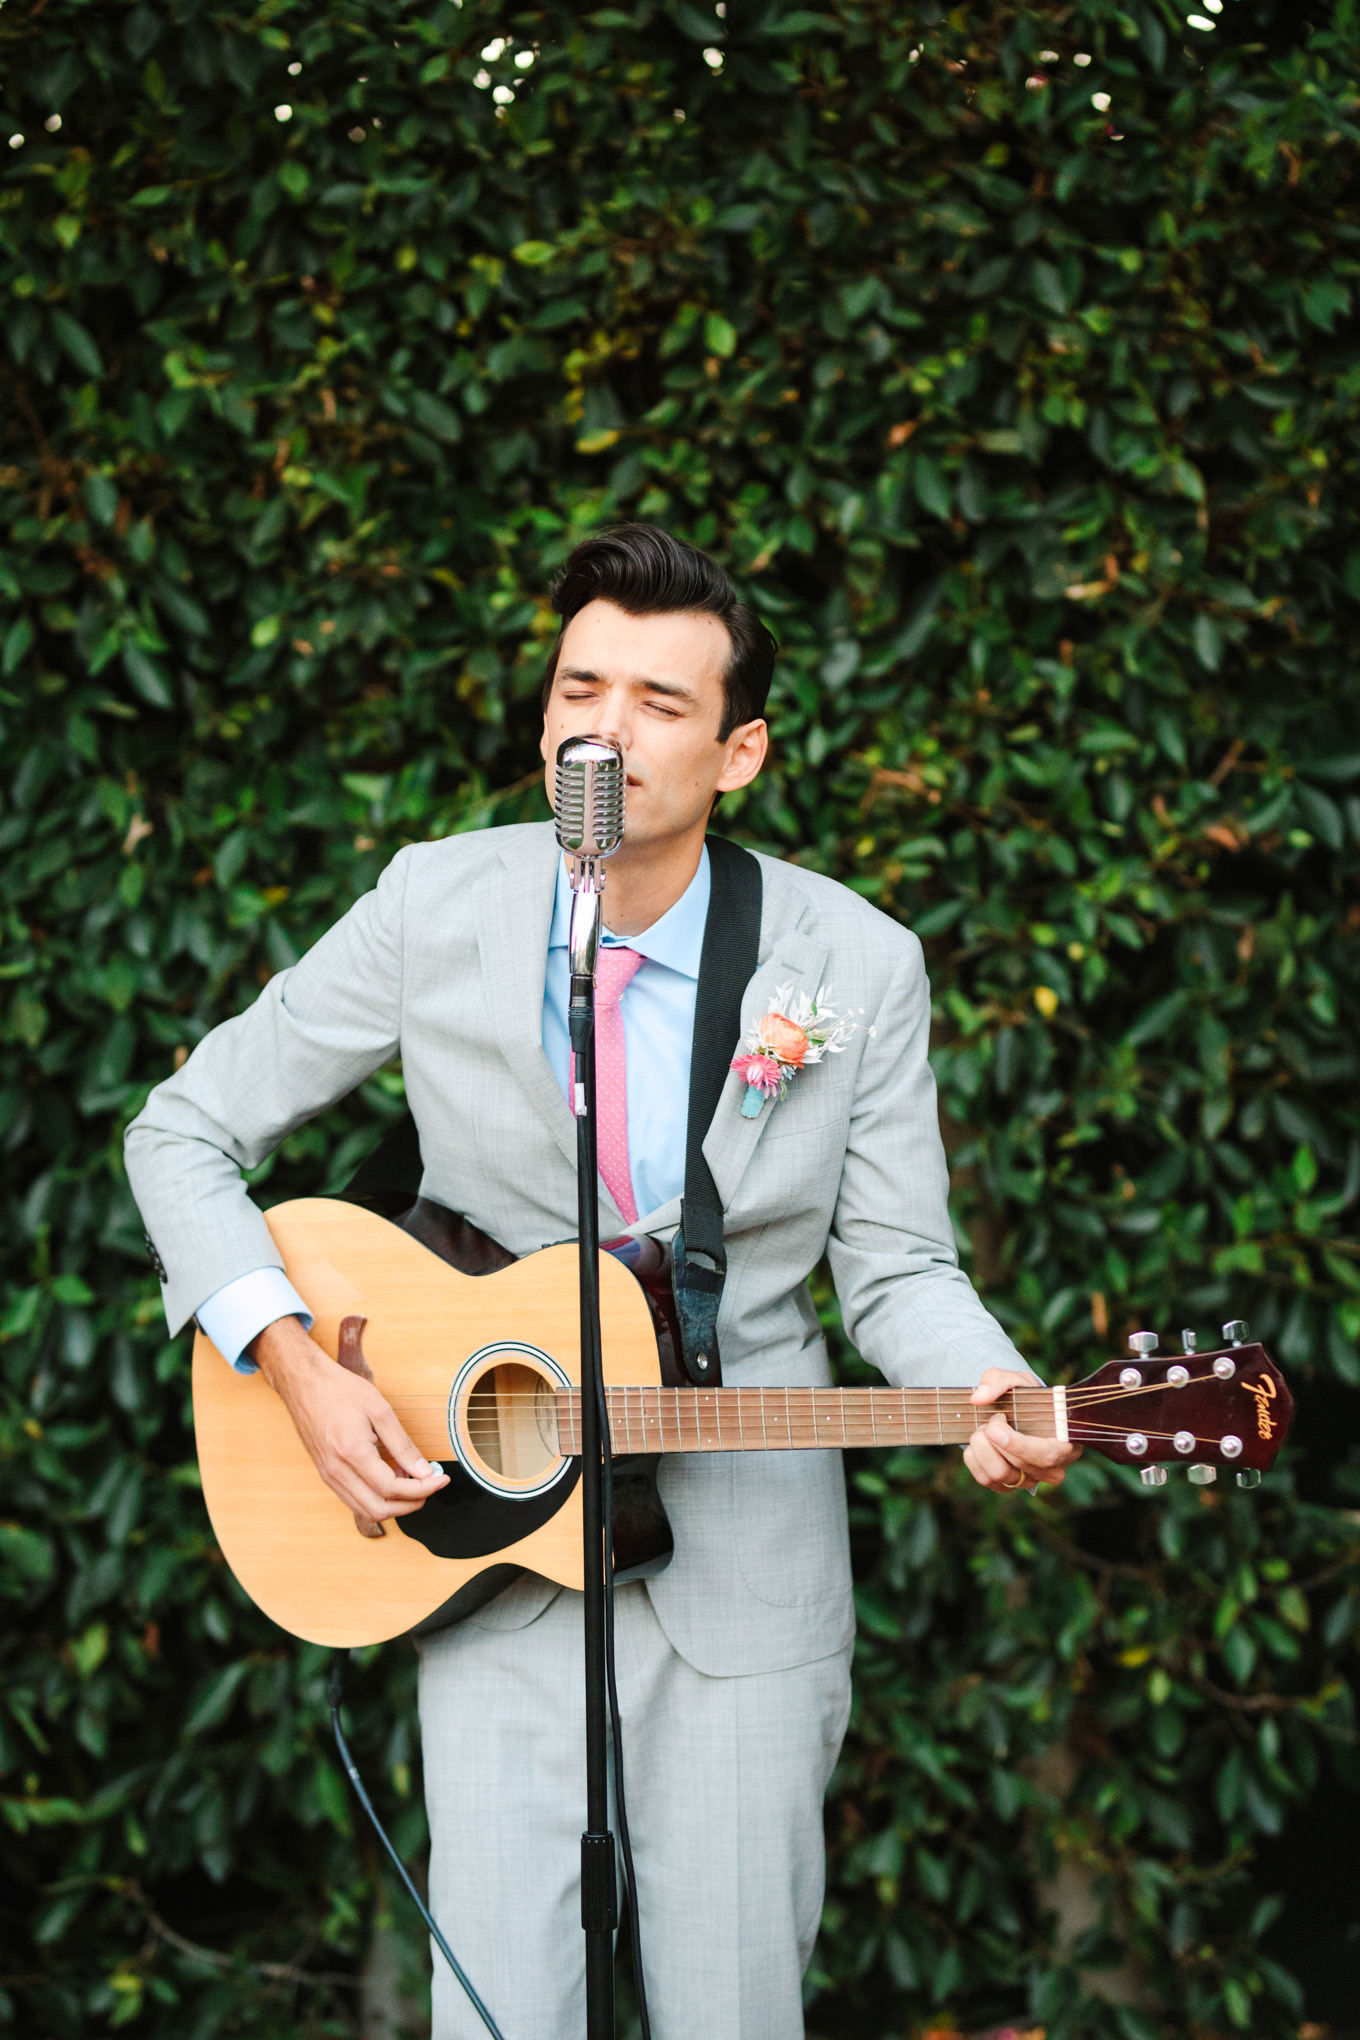 Groom singing to the bride | Colorful pop-up micro wedding at The Ruby Street Los Angeles featured on Green Wedding Shoes | Colorful and elevated photography for fun-loving couples in Southern California | #colorfulwedding #popupwedding #weddingphotography #microwedding Source: Mary Costa Photography | Los Angeles